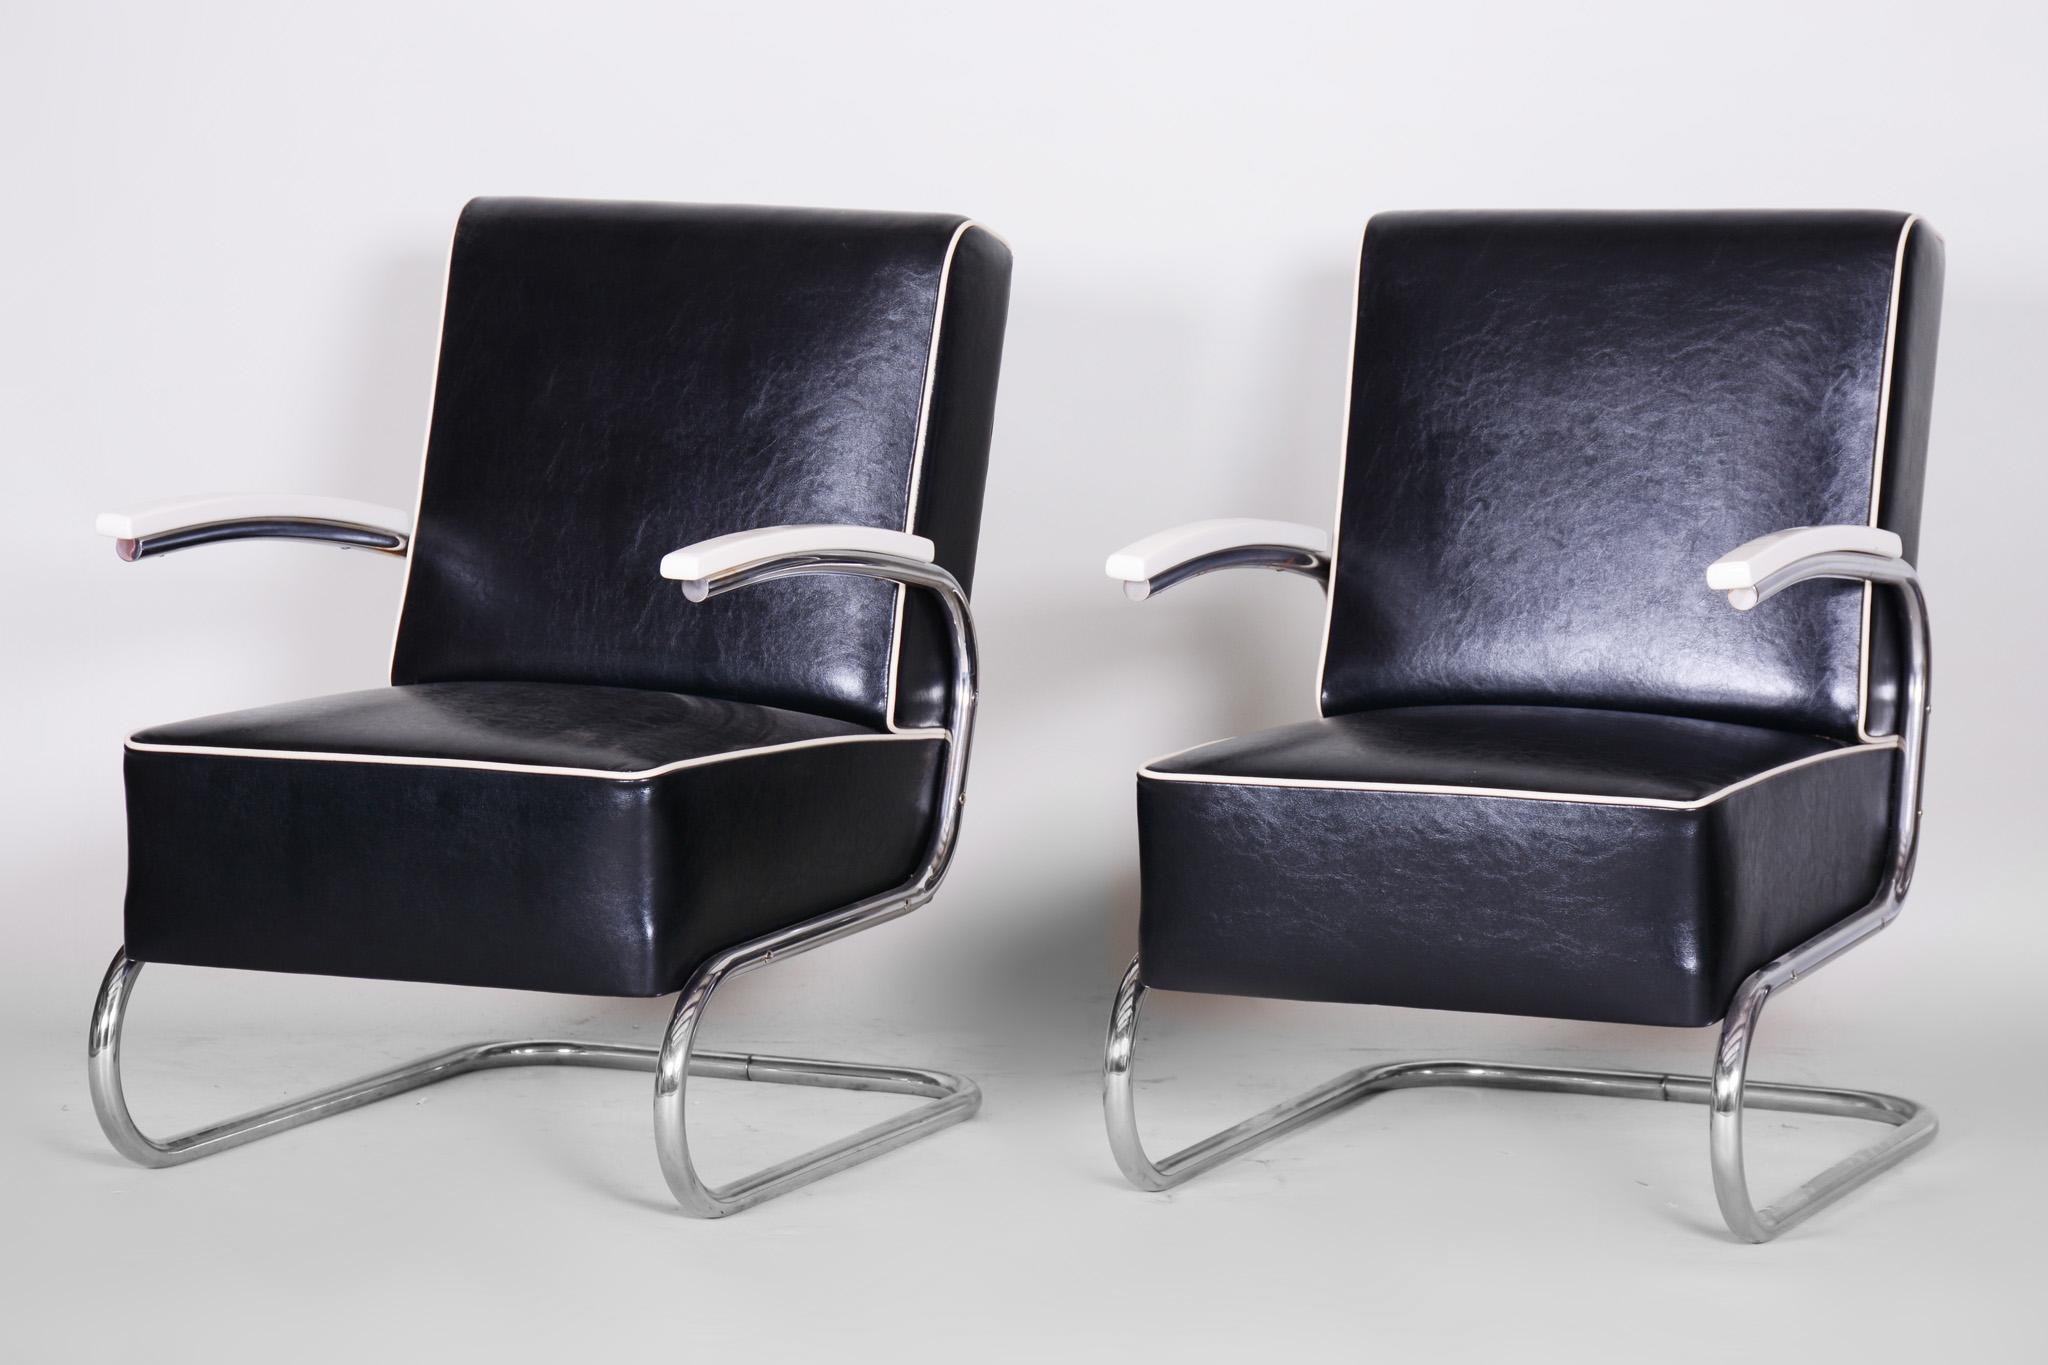 Bauhaus Pair of Tubular Steel Cantilever Armchairs in Art Deco, Chrome, New Upholstery For Sale